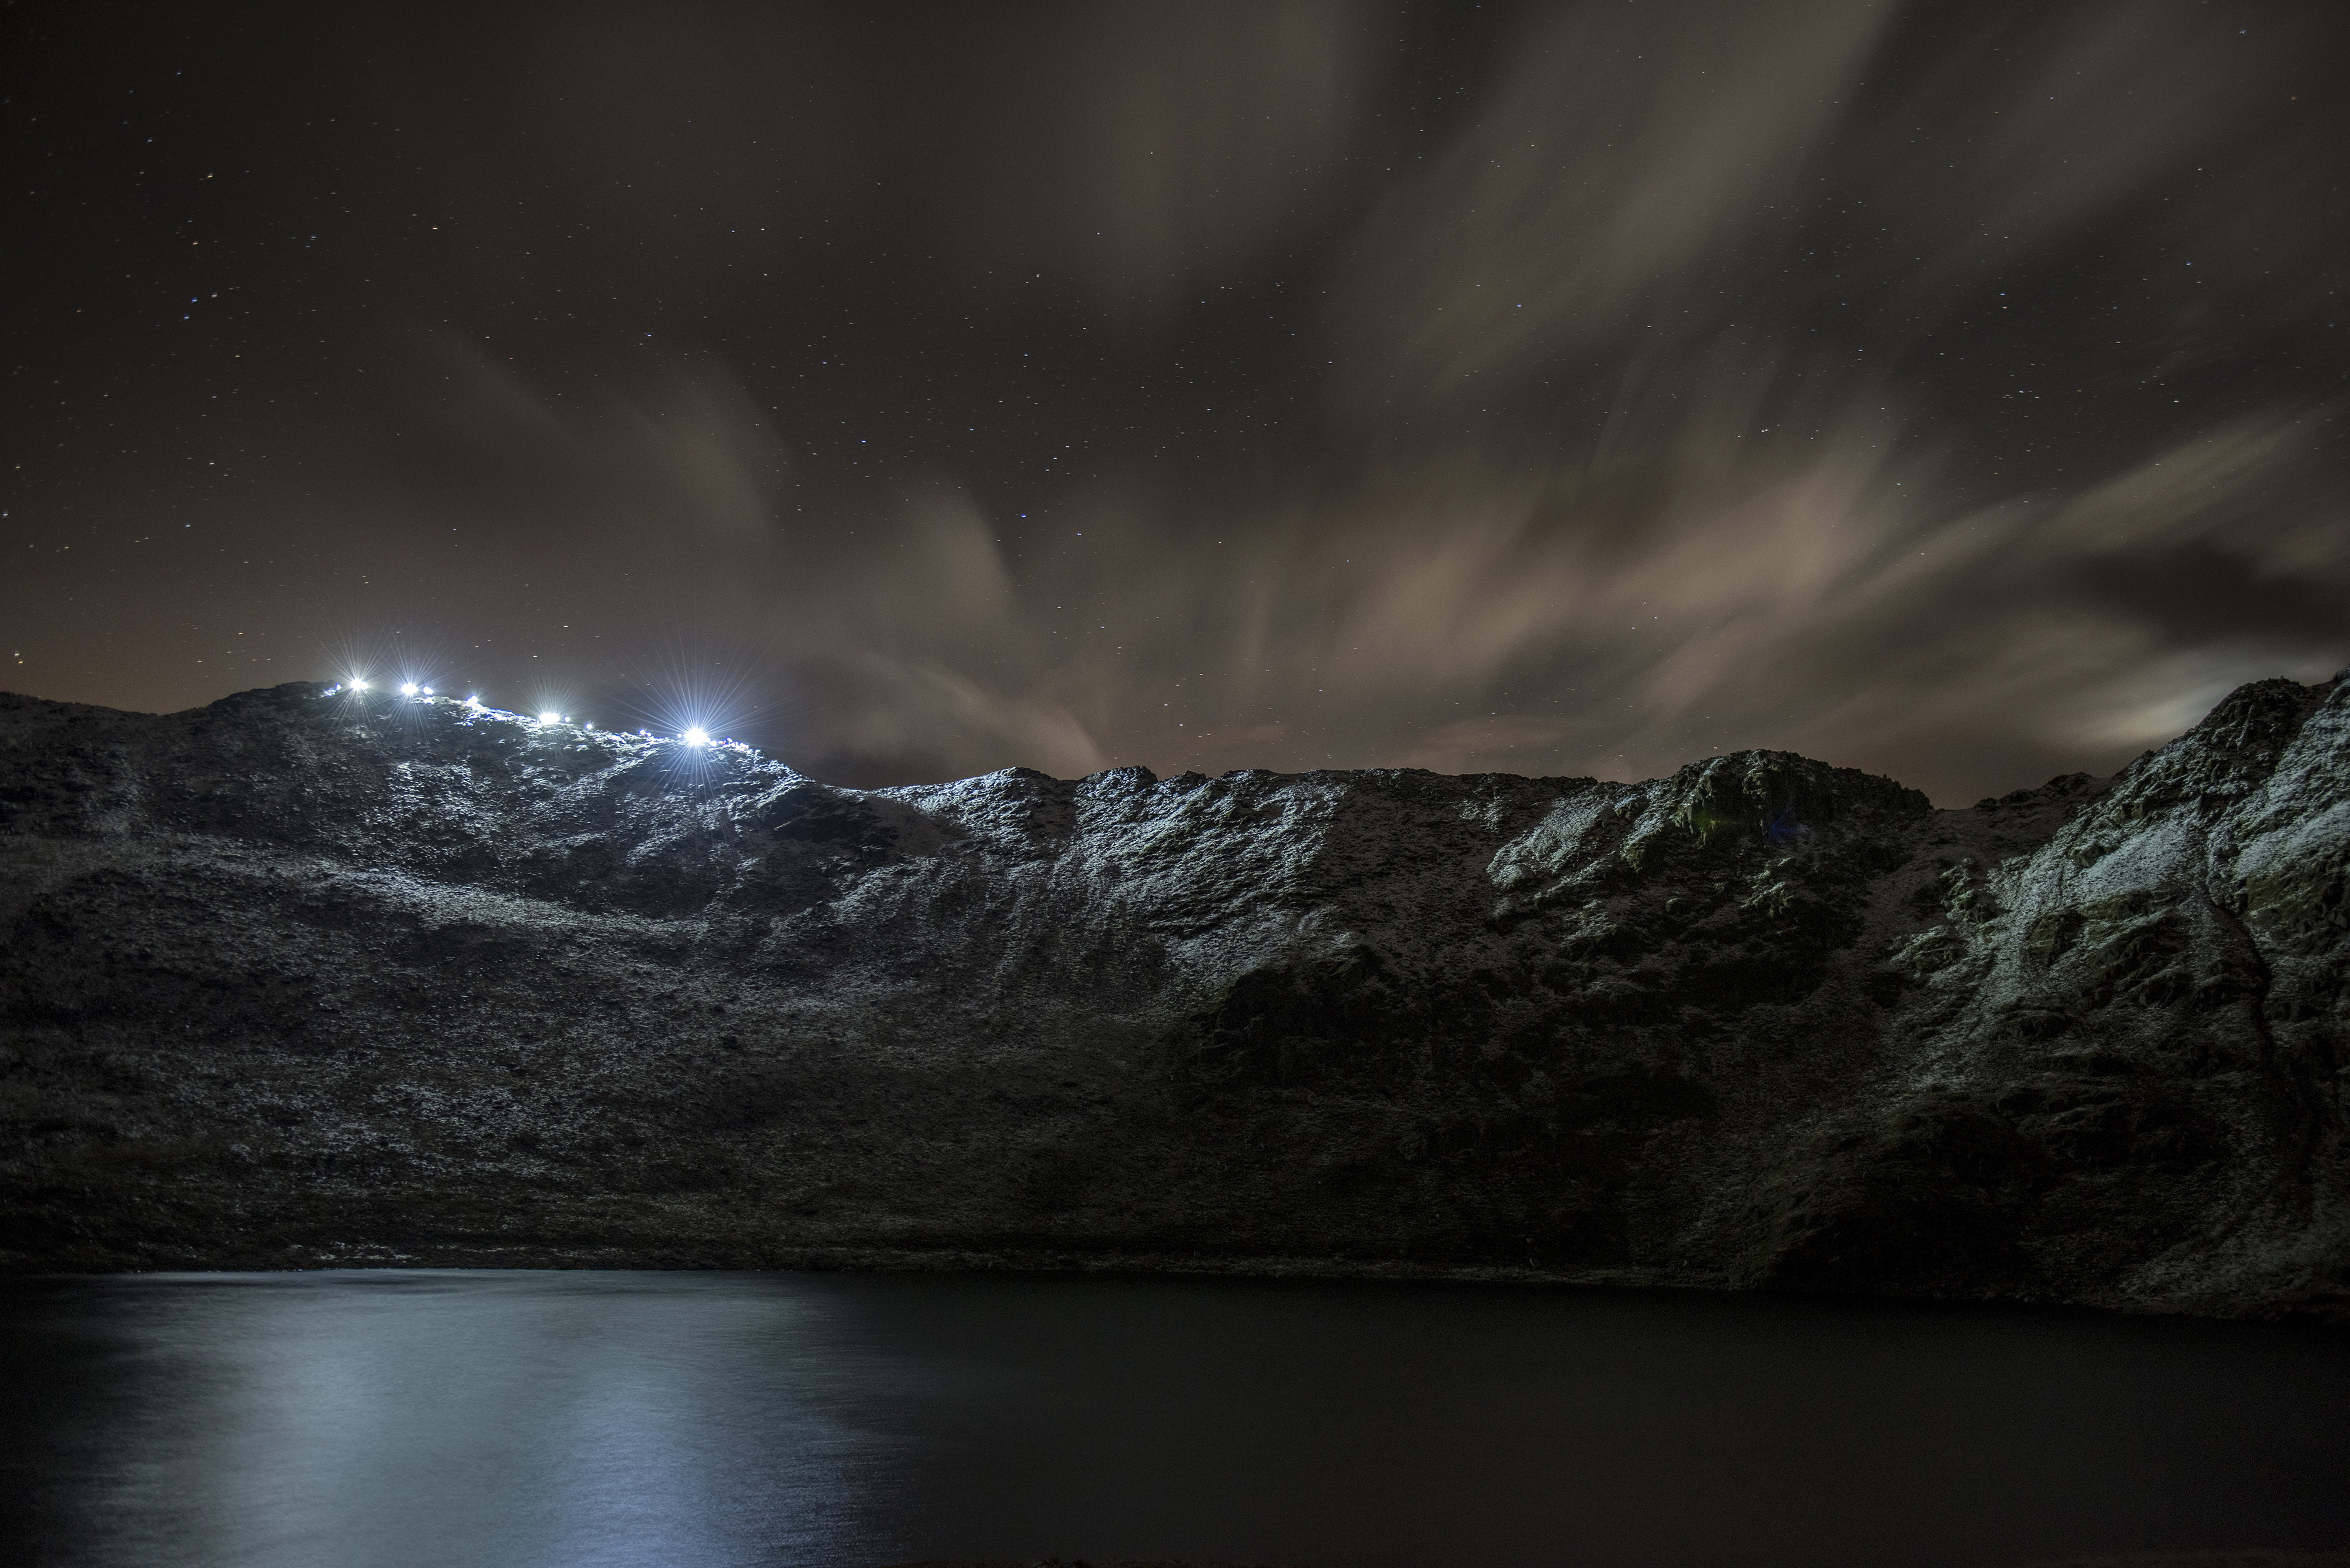 General 4000x2669 nature landscape mountains clouds night long exposure torches lights water stars reflection low light